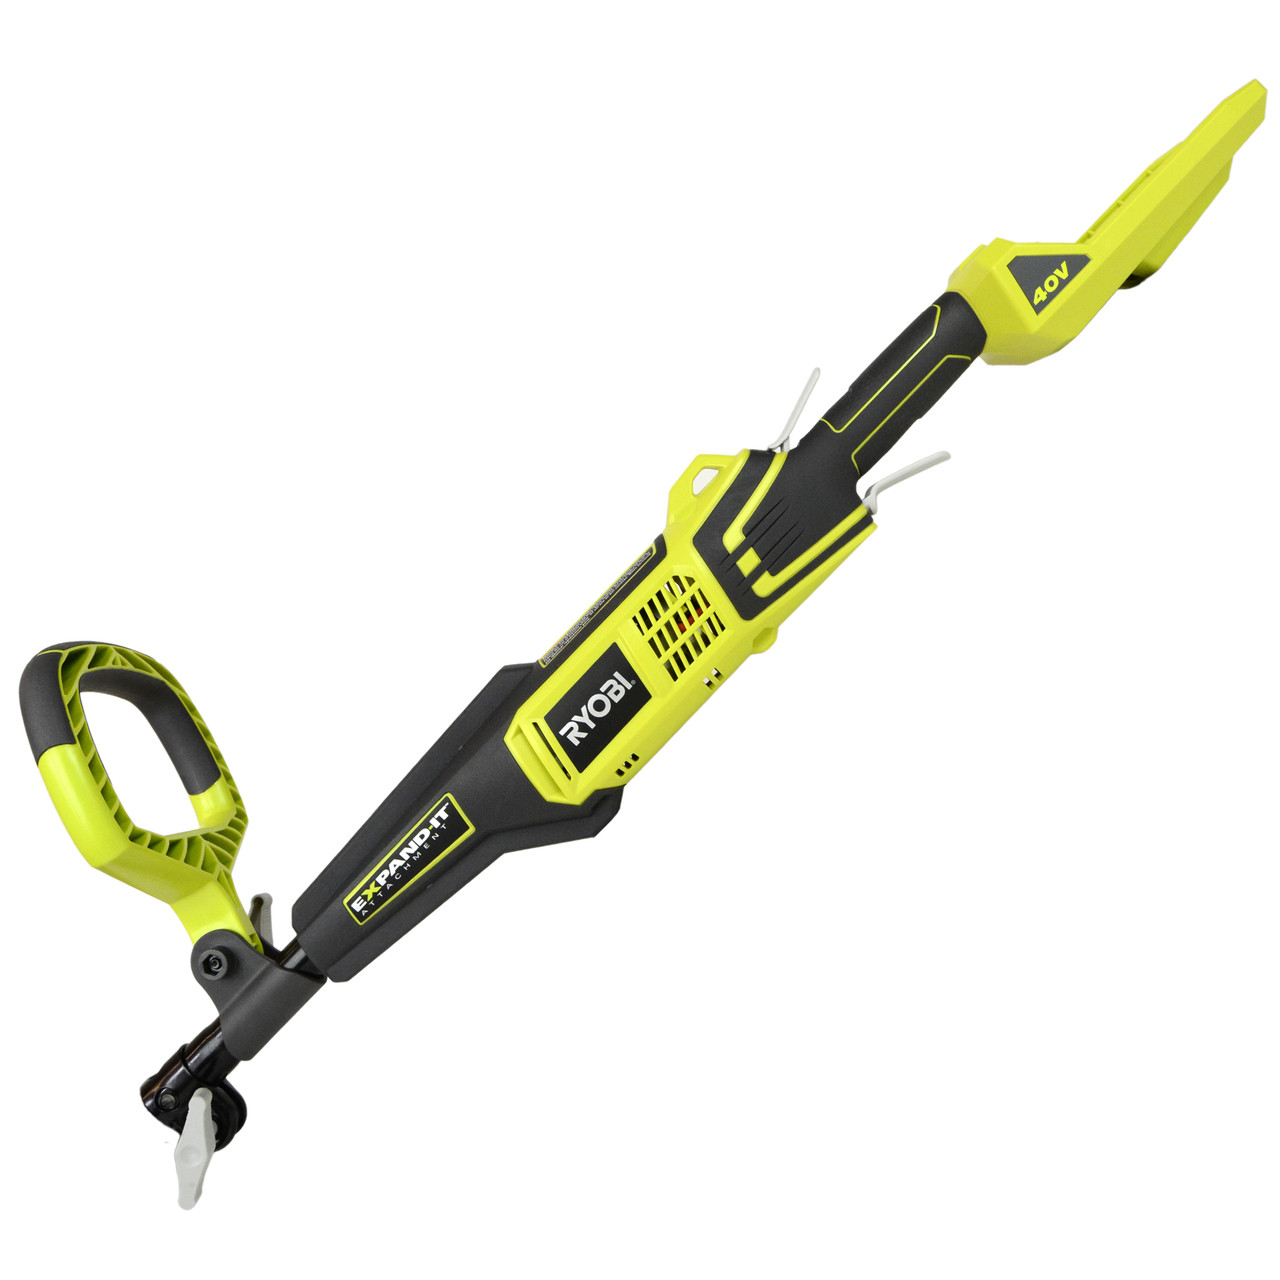 Ryobi 40v Expand It Cordless Battery Attachment Capable Trimmer Power